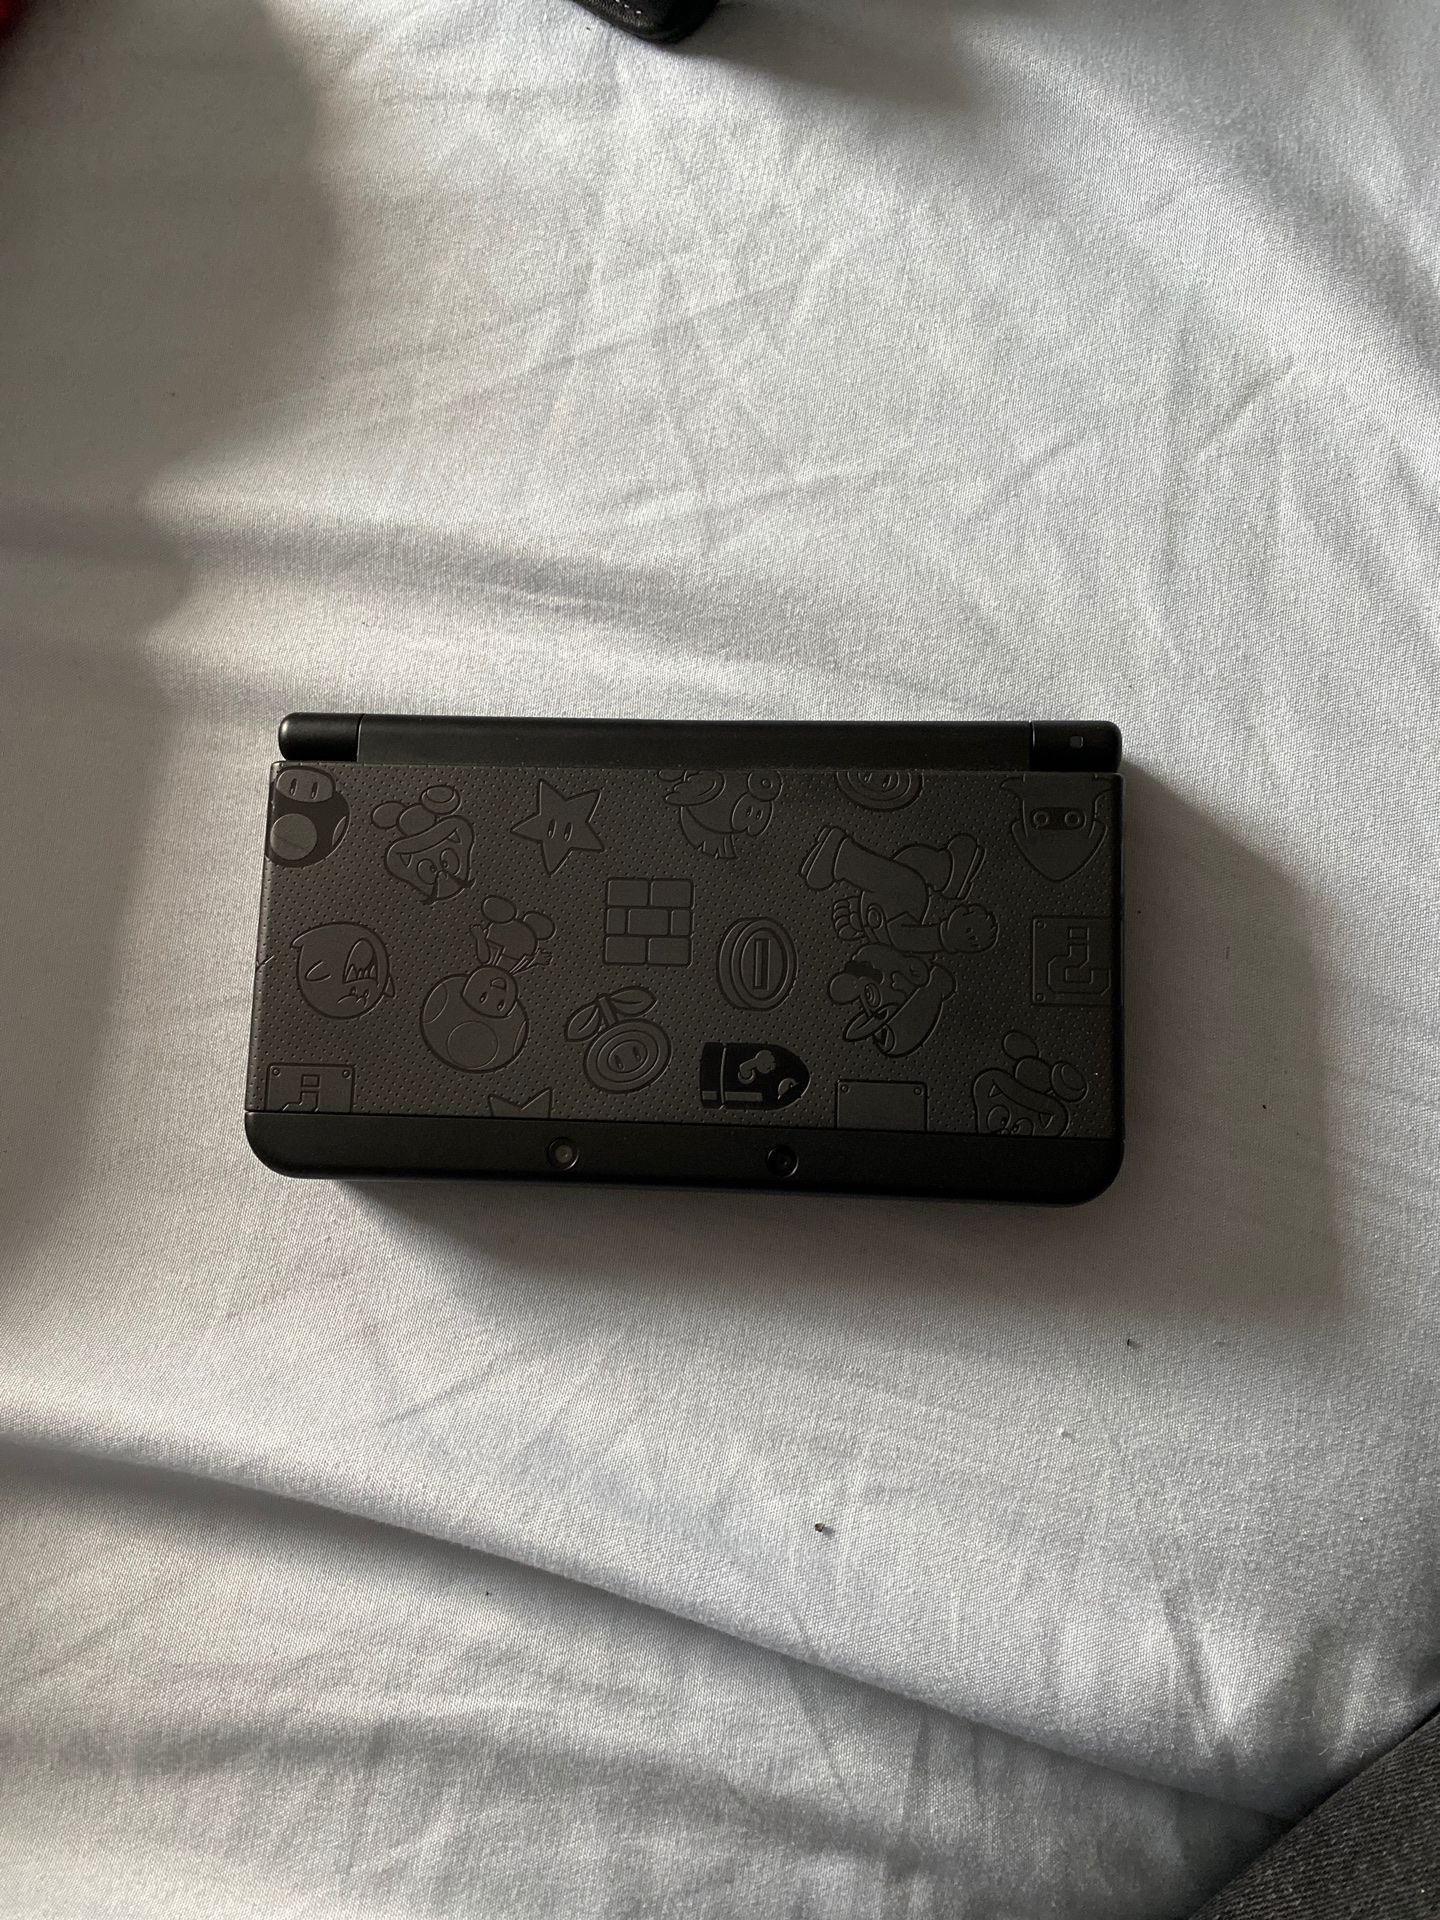 Nintendo 3ds limited edition